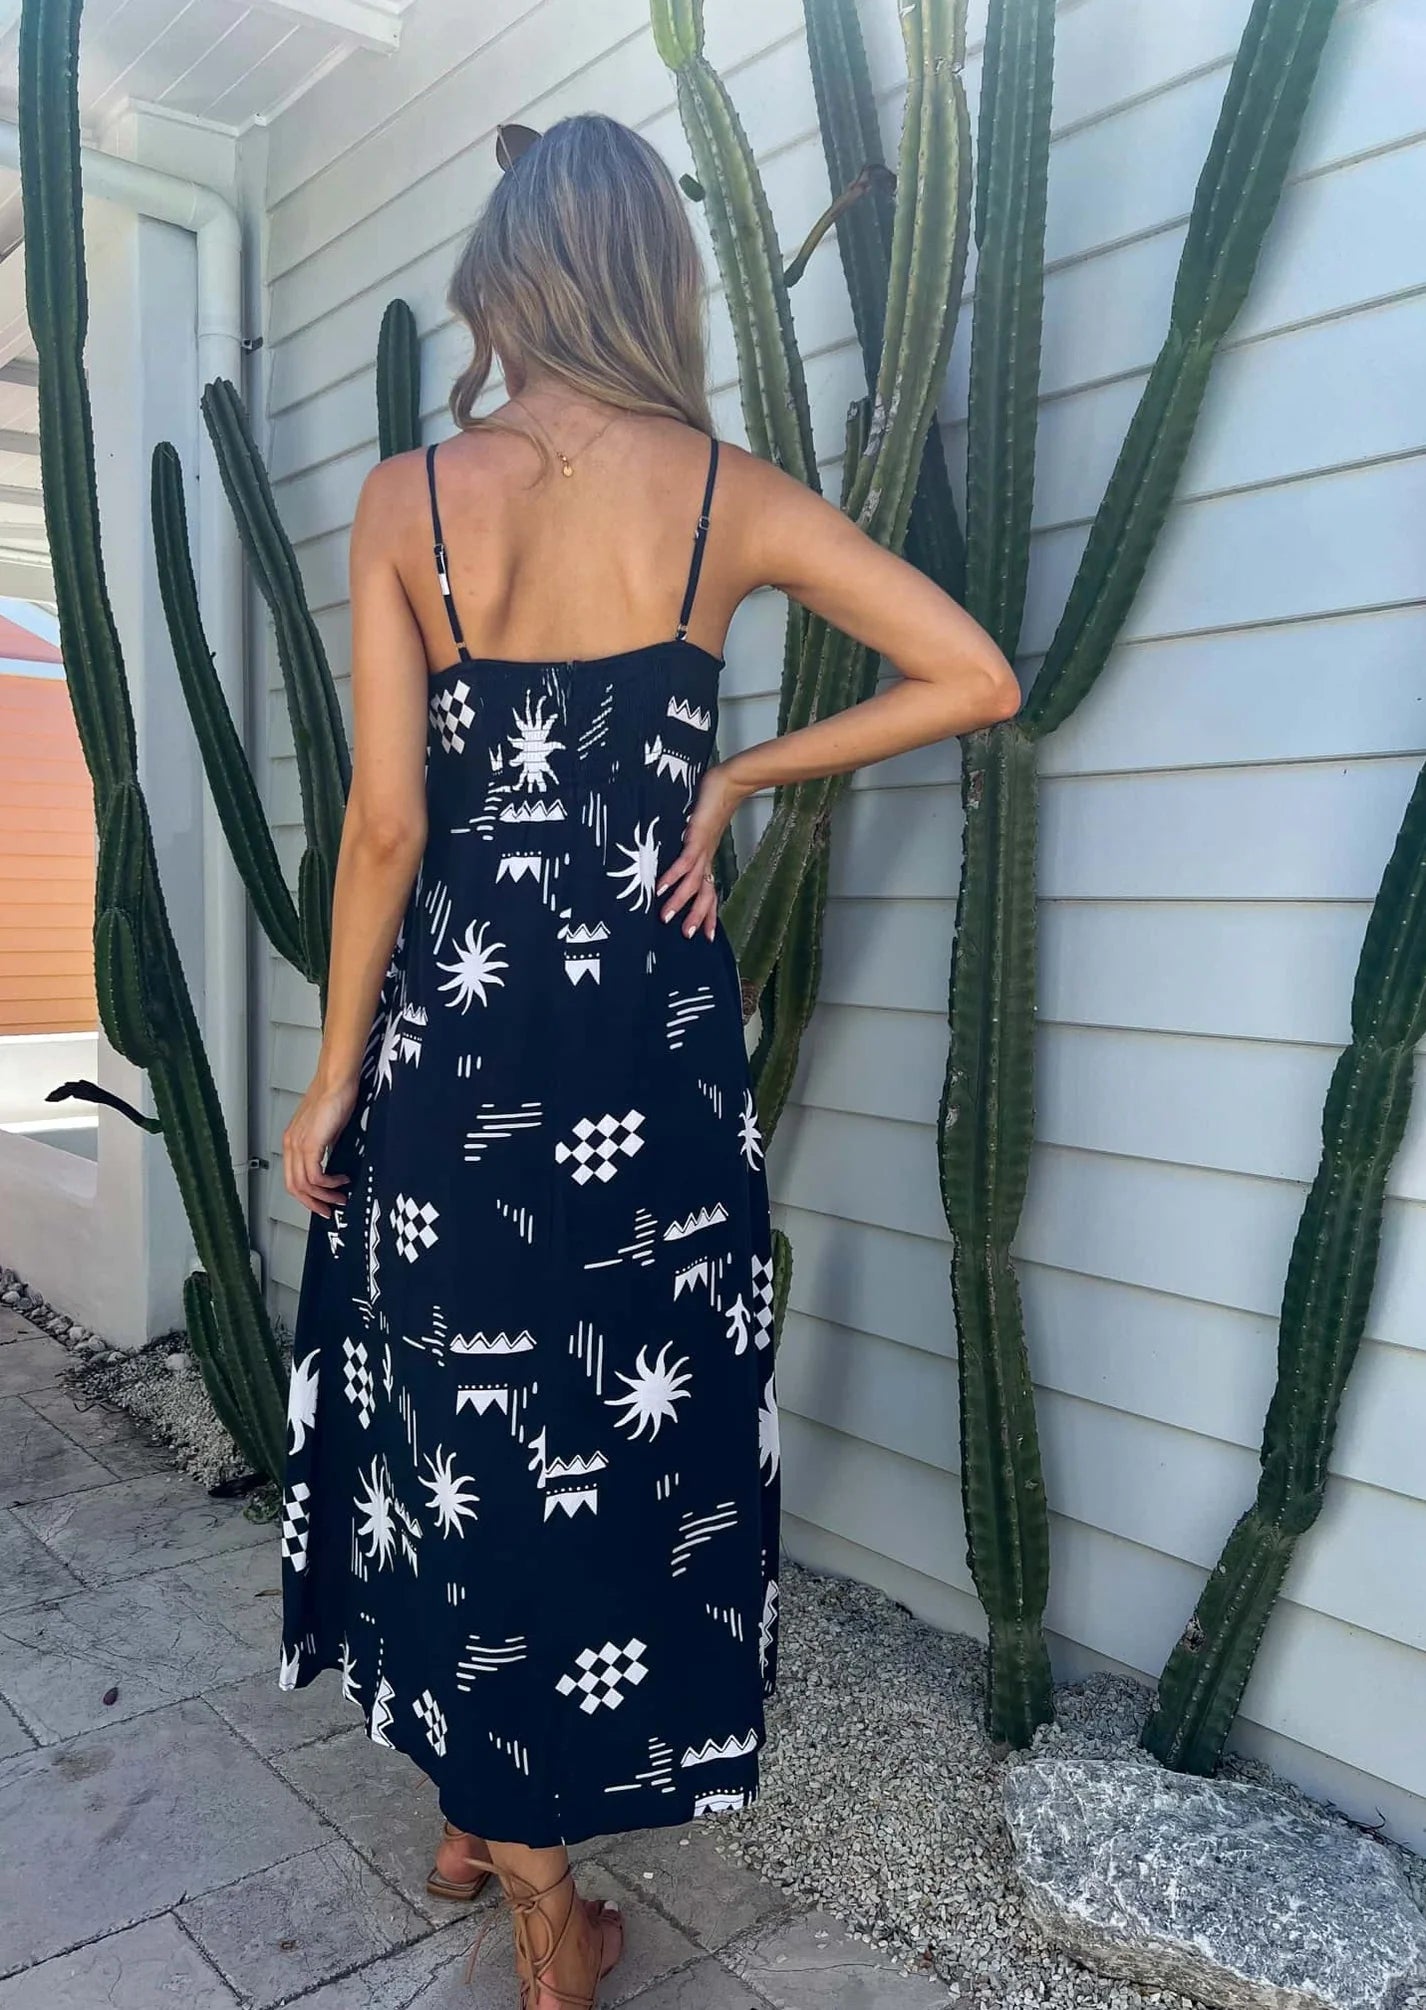 The Celia Maxi Dress boasts a playful square neckline and adjustable spaghetti straps for a perfect fit. It also features convenient pockets and a rouched back for added comfort. Stay effortlessly stylish in this Sol Navy Print design.